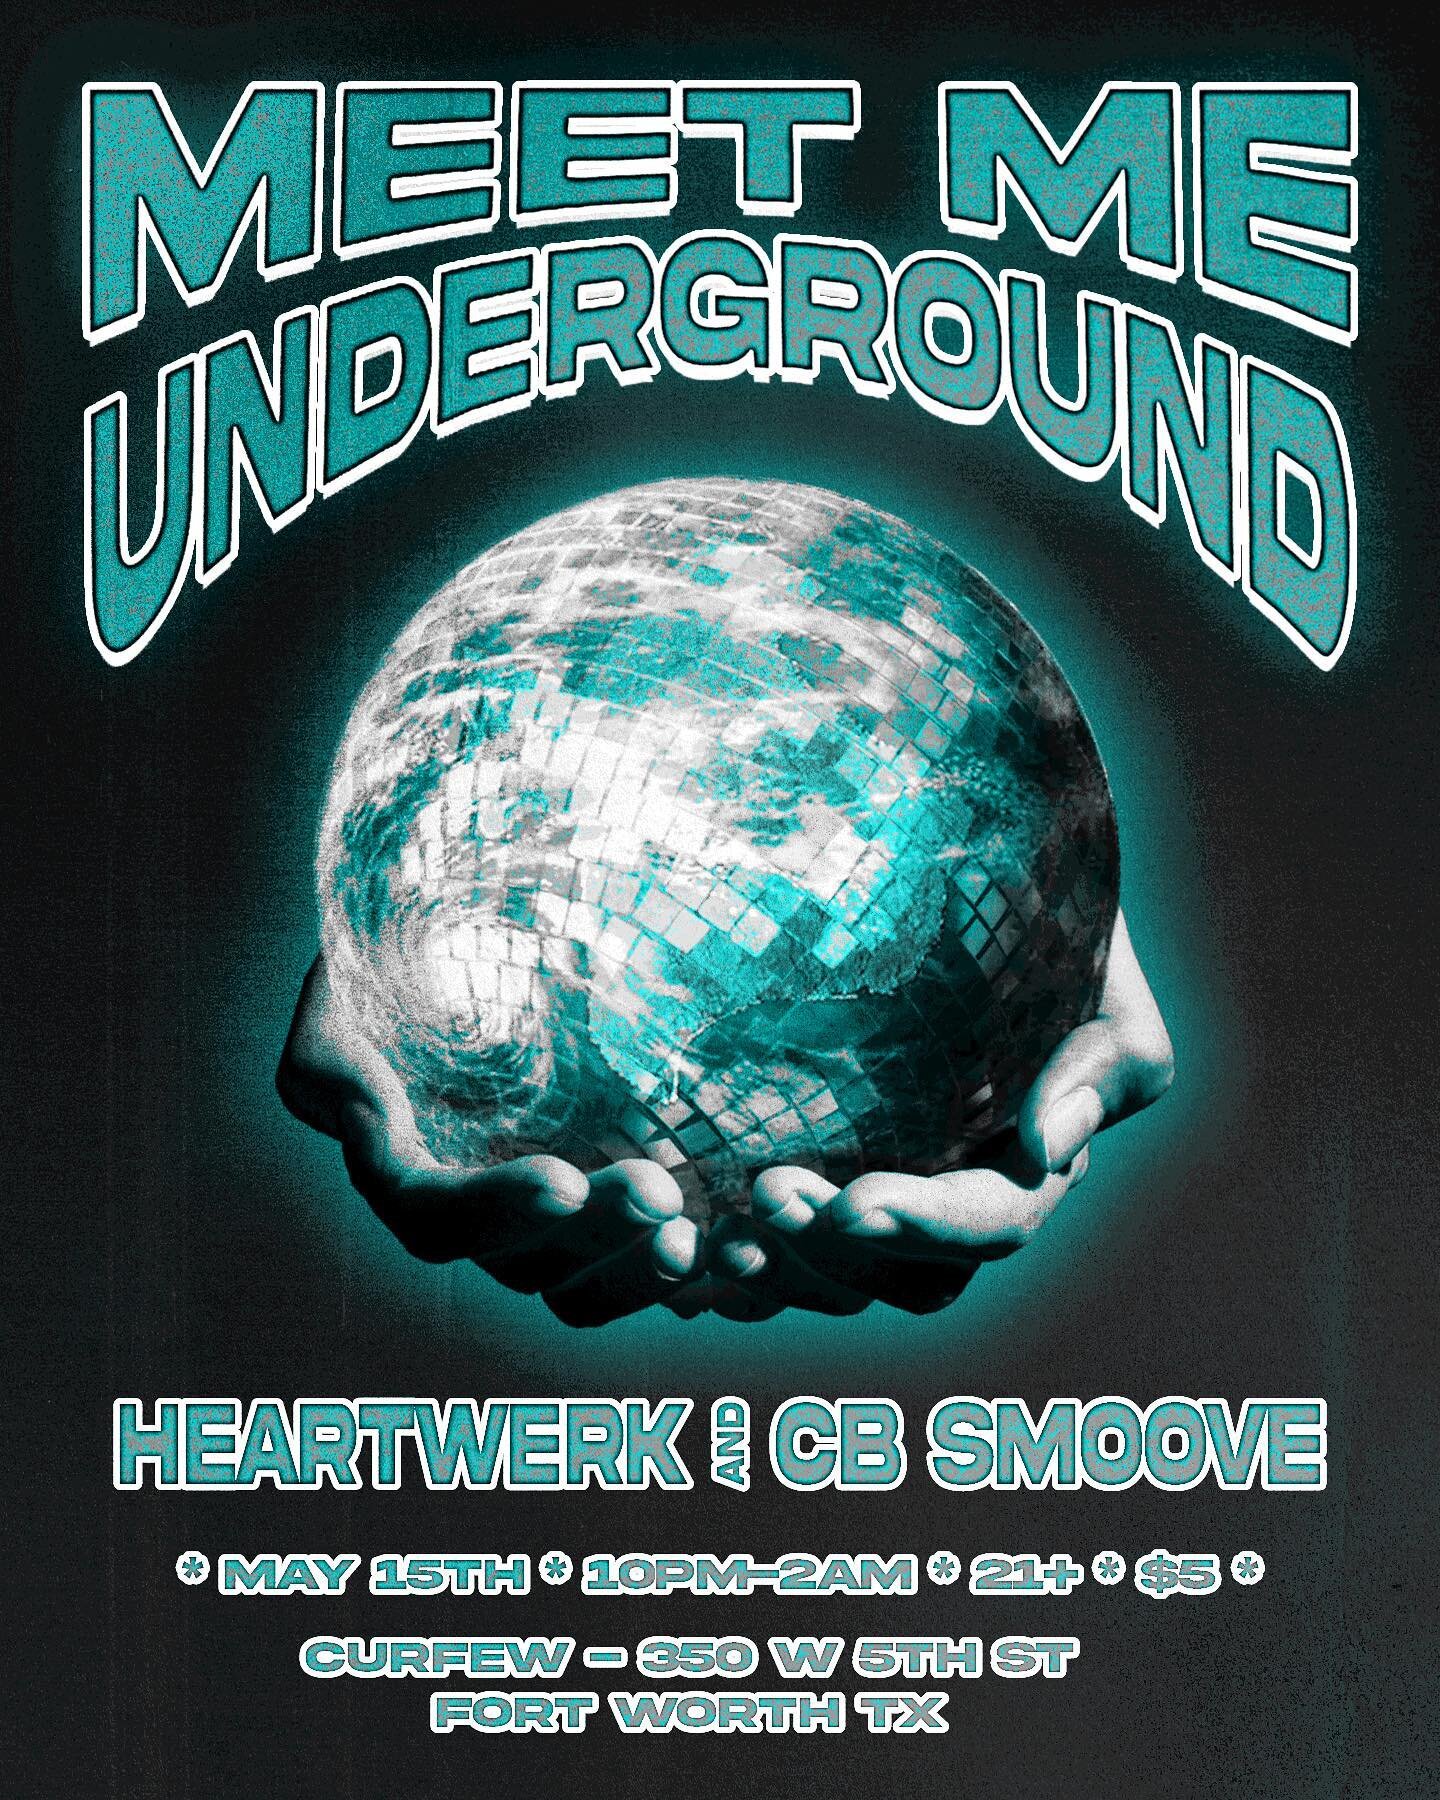 Excited to be back at @meetmeundergroundtx this Monday alongside @c.b.smoove 💞💪🏻